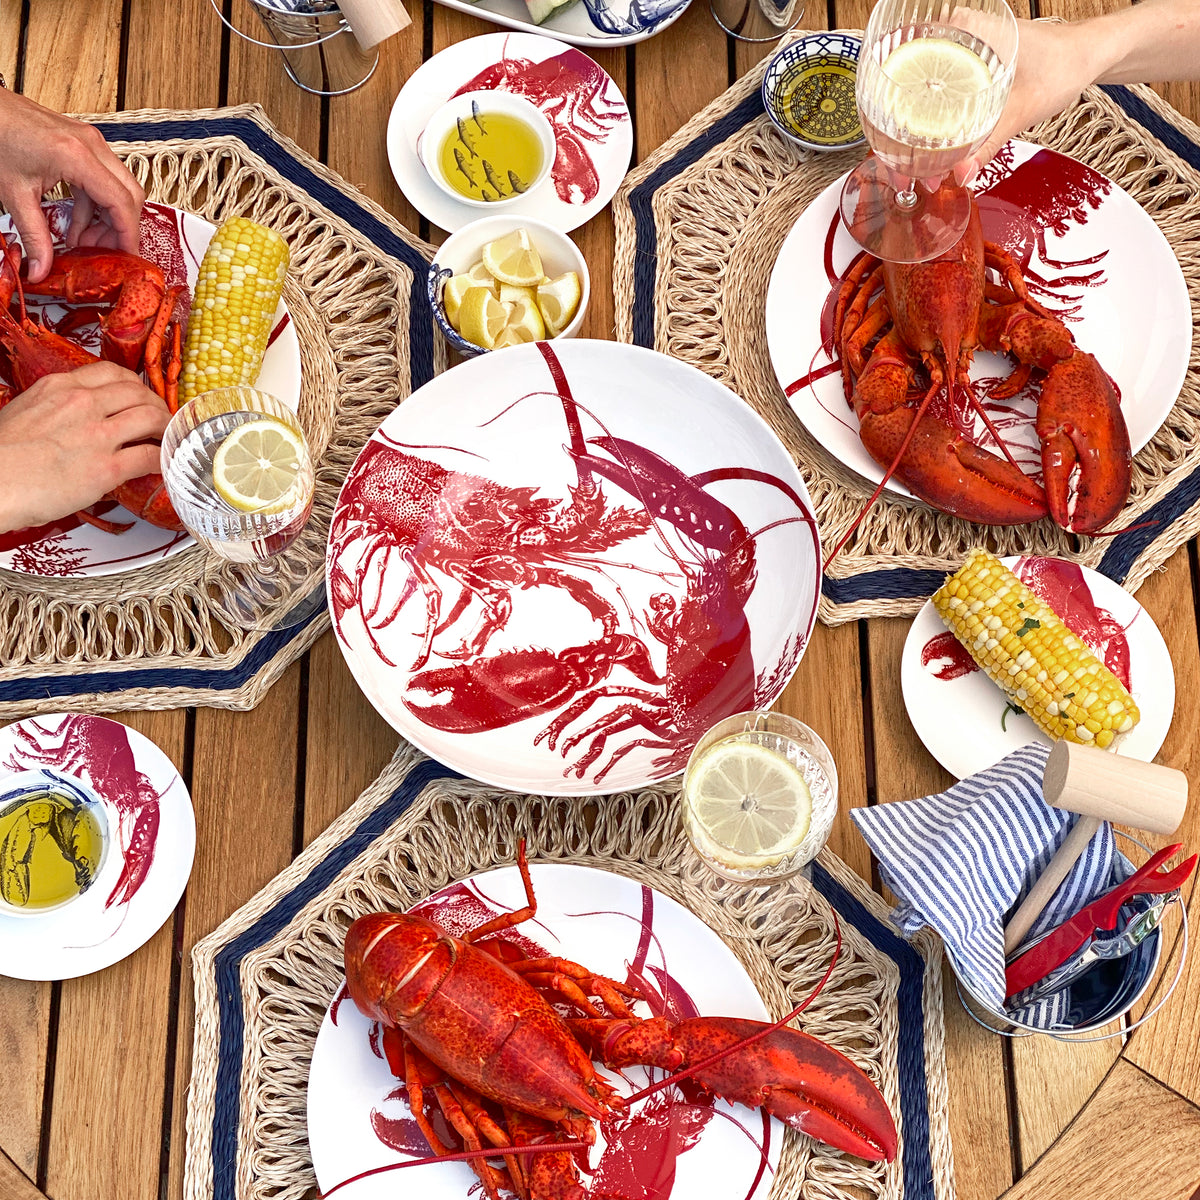 Four place settings with lobster-themed dishes and placemats feature whole lobsters, corn on the cob, and lemon wedges on a wooden table. A July Fourth Bundle by Caskata brimming with fresh seafood sits in the center. Two hands are visible, holding a lobster and a glass of water.